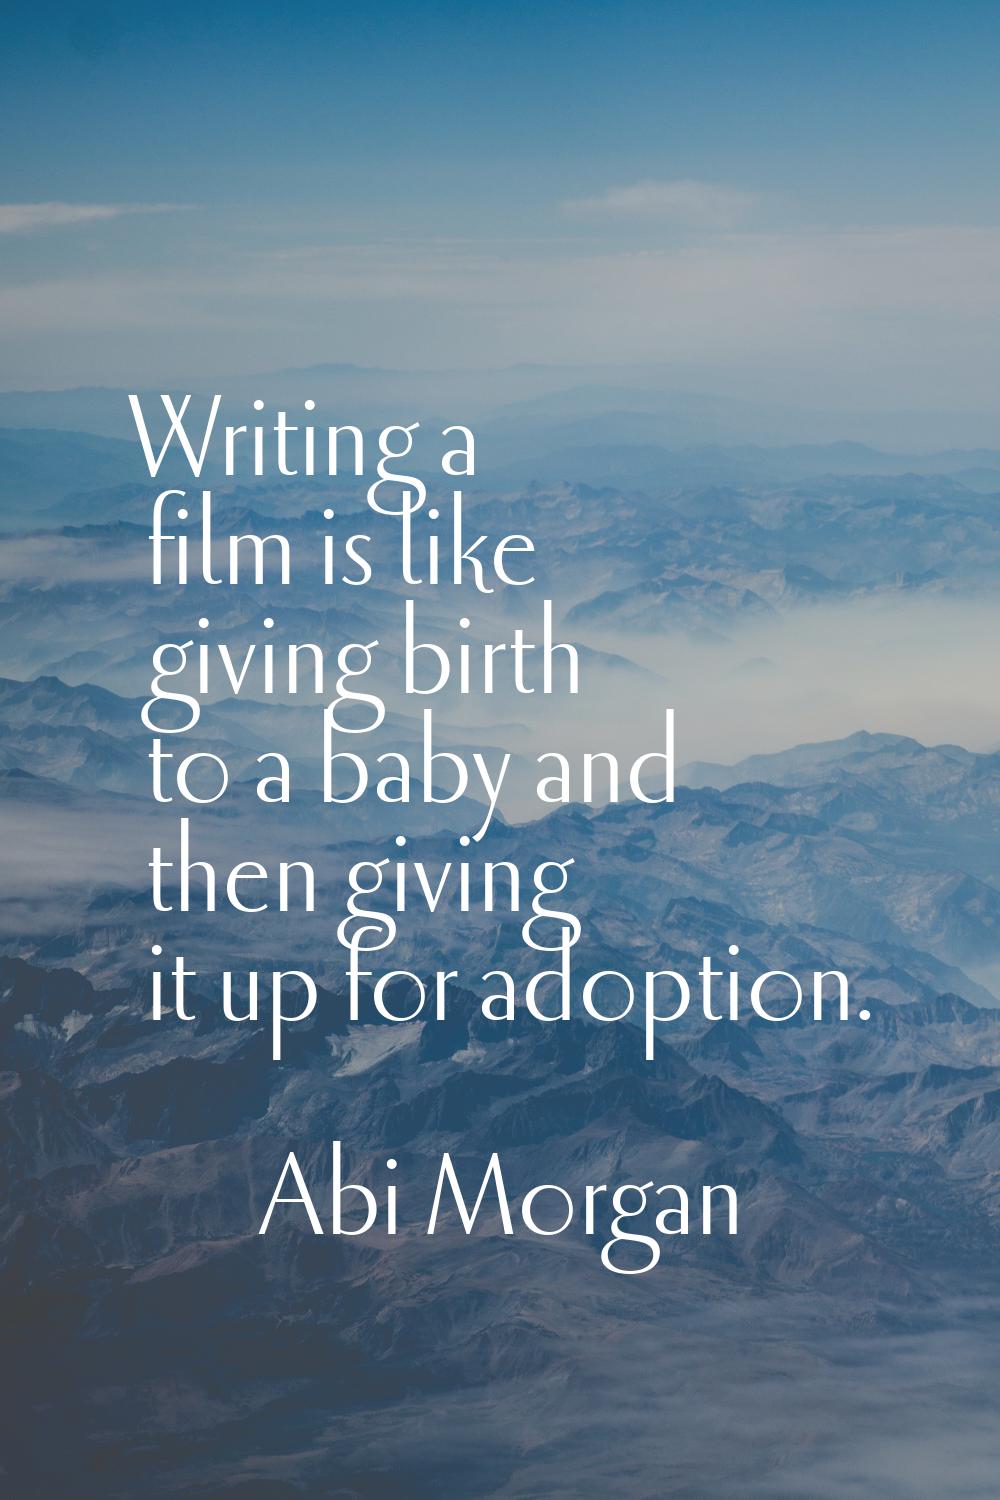 Writing a film is like giving birth to a baby and then giving it up for adoption.